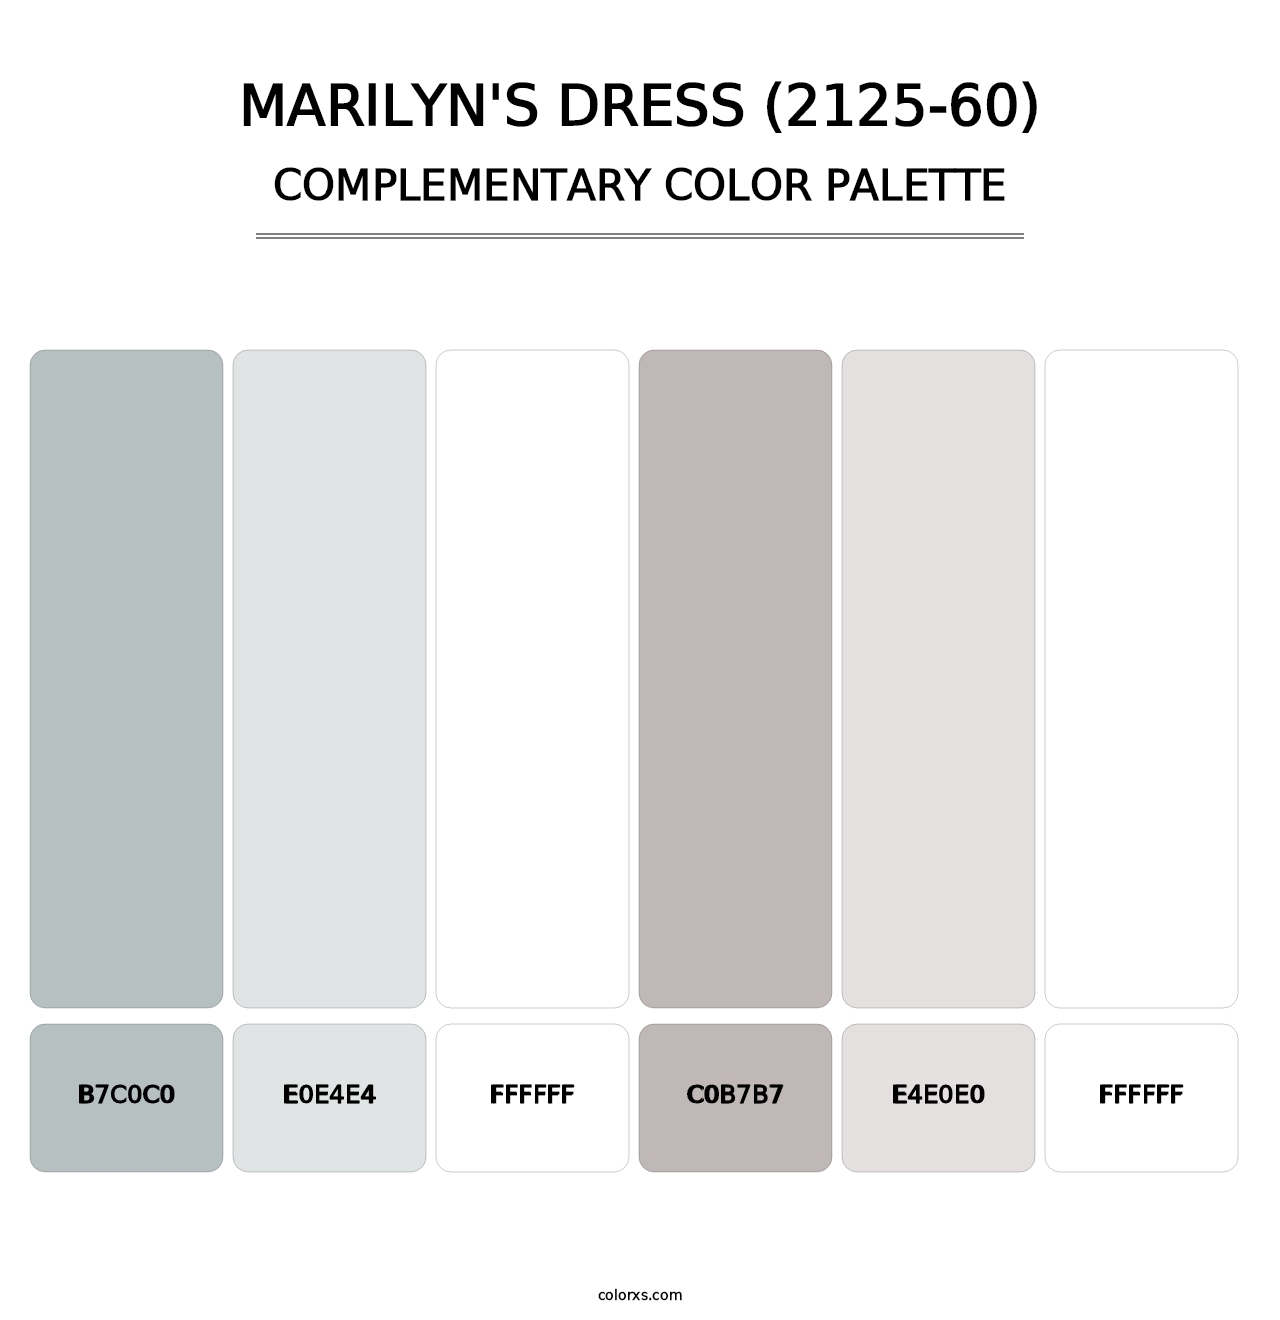 Marilyn's Dress (2125-60) - Complementary Color Palette